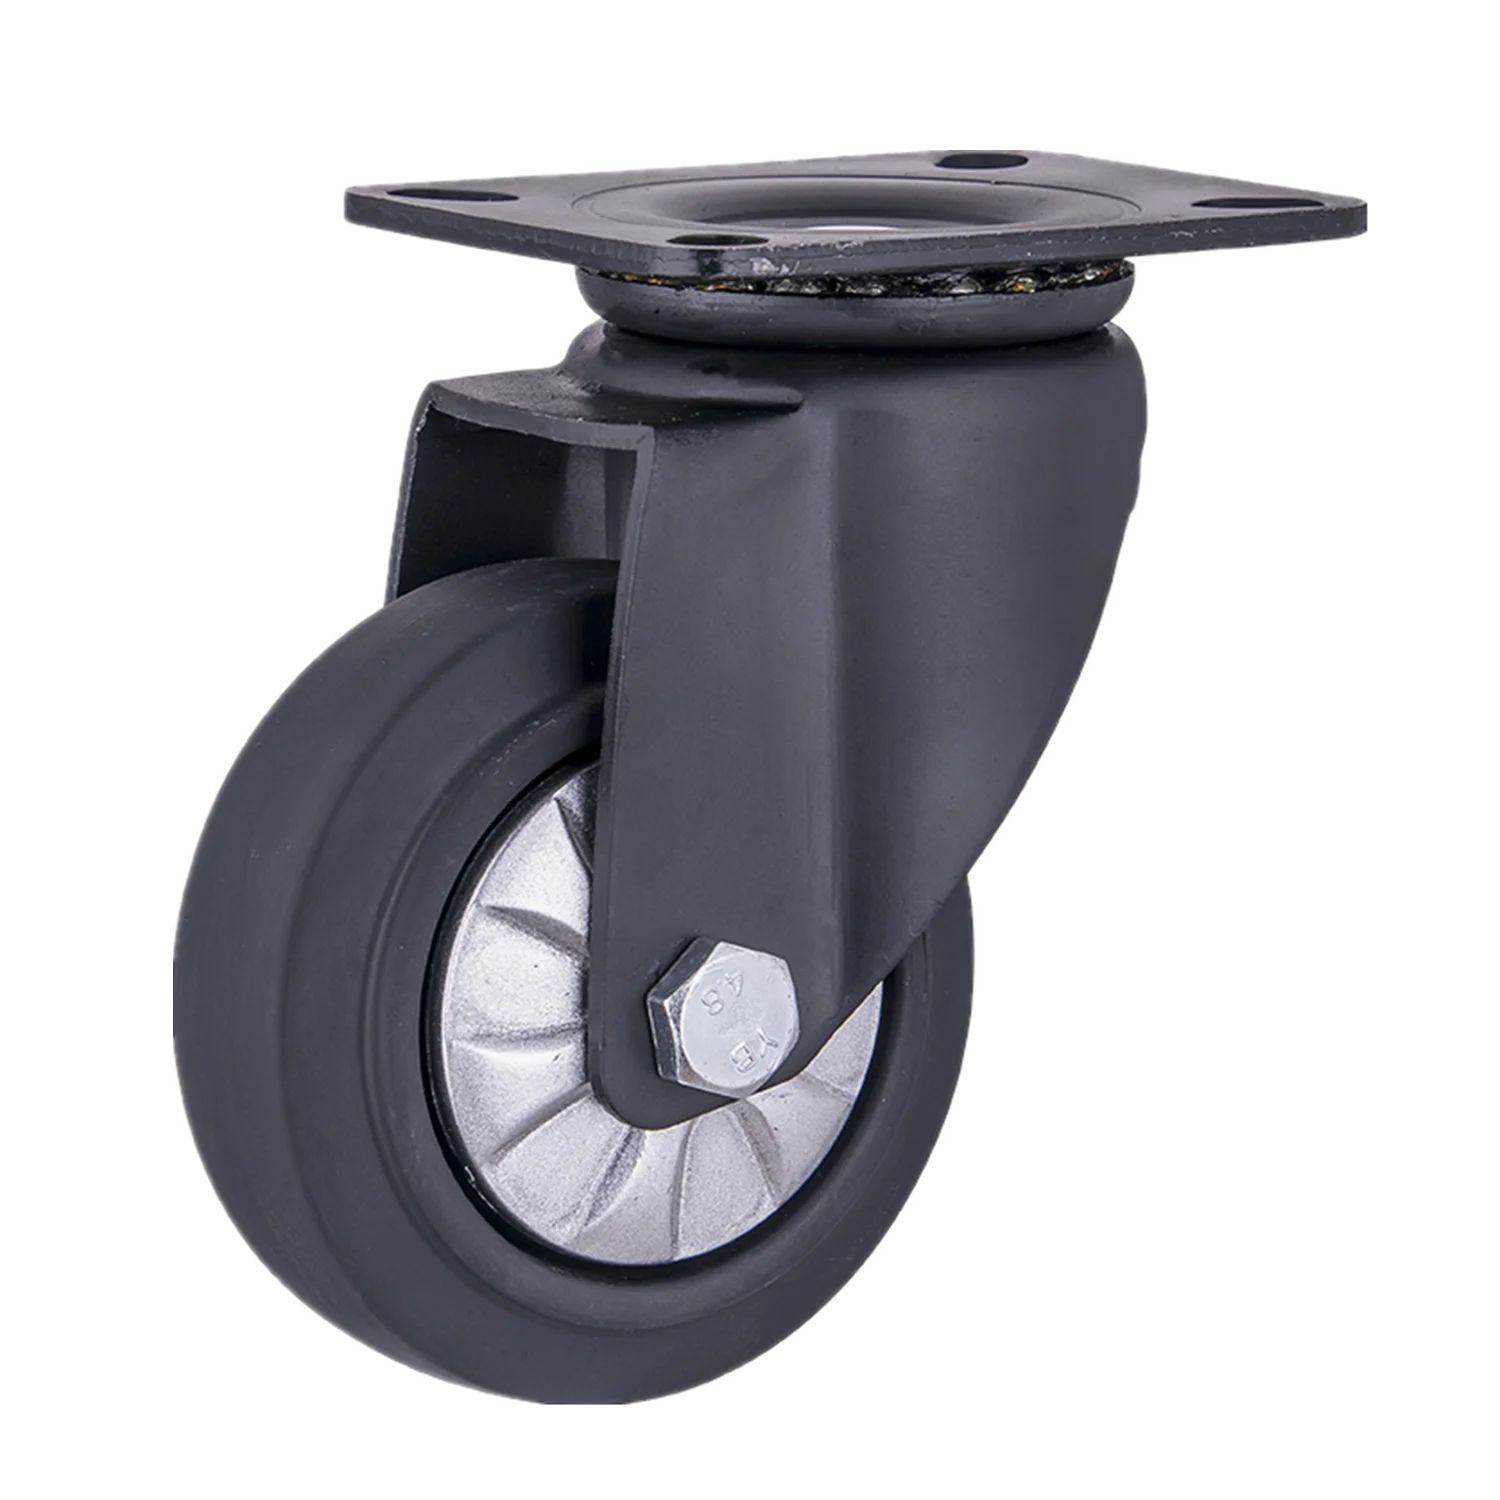 4"  Retractable Warehouse and Transportation Trolley Swivel Total Brake Black Elastic Thermoplastic Rubber Caster